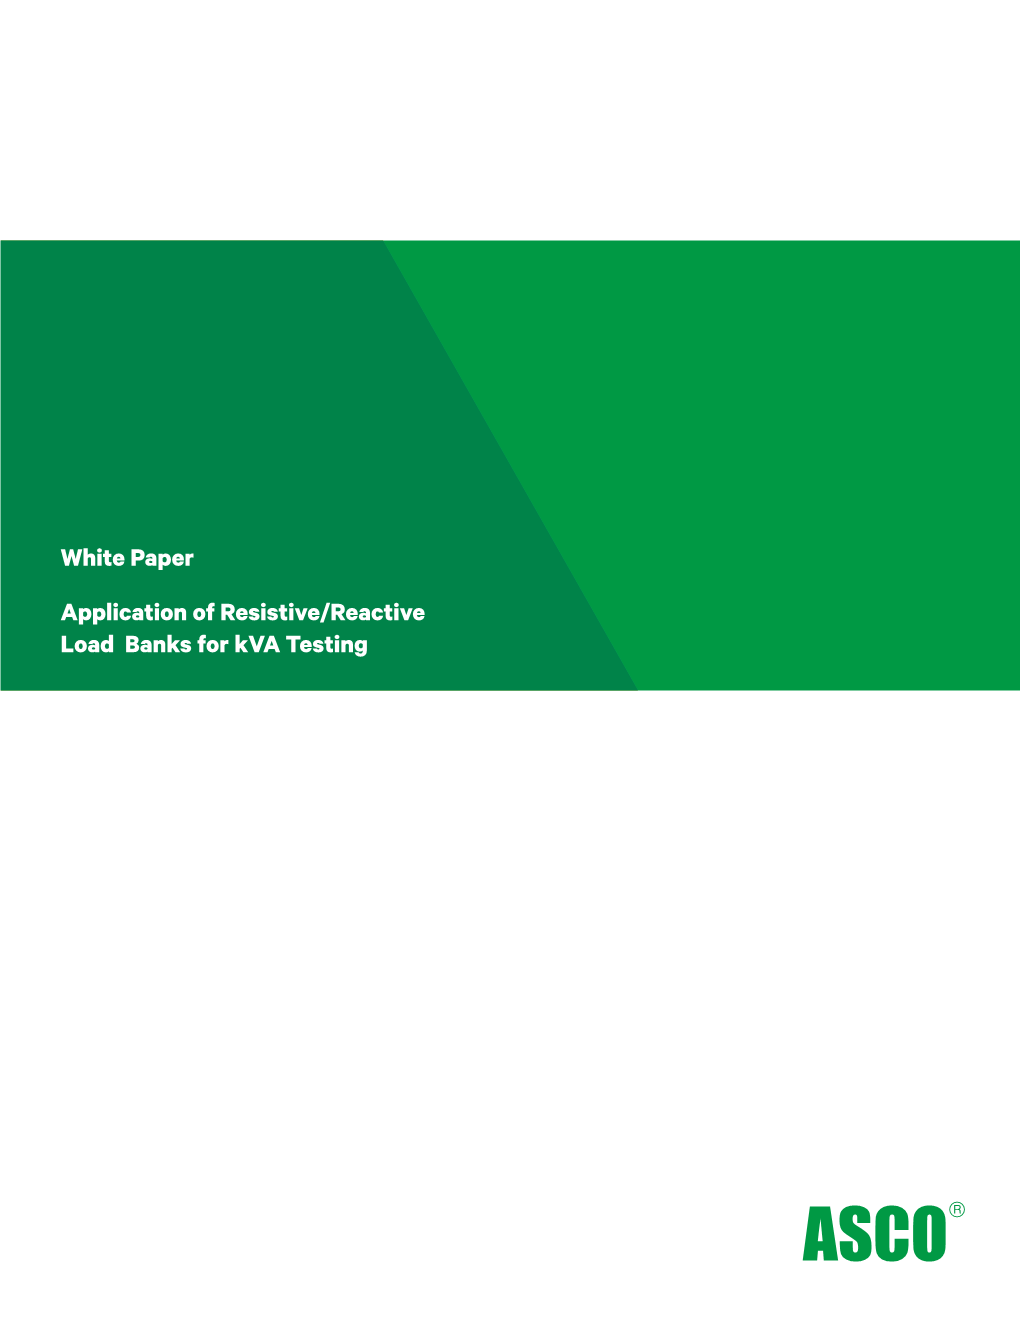 ASCO White Paper | Application of Resistive/Reactive Load Banks For